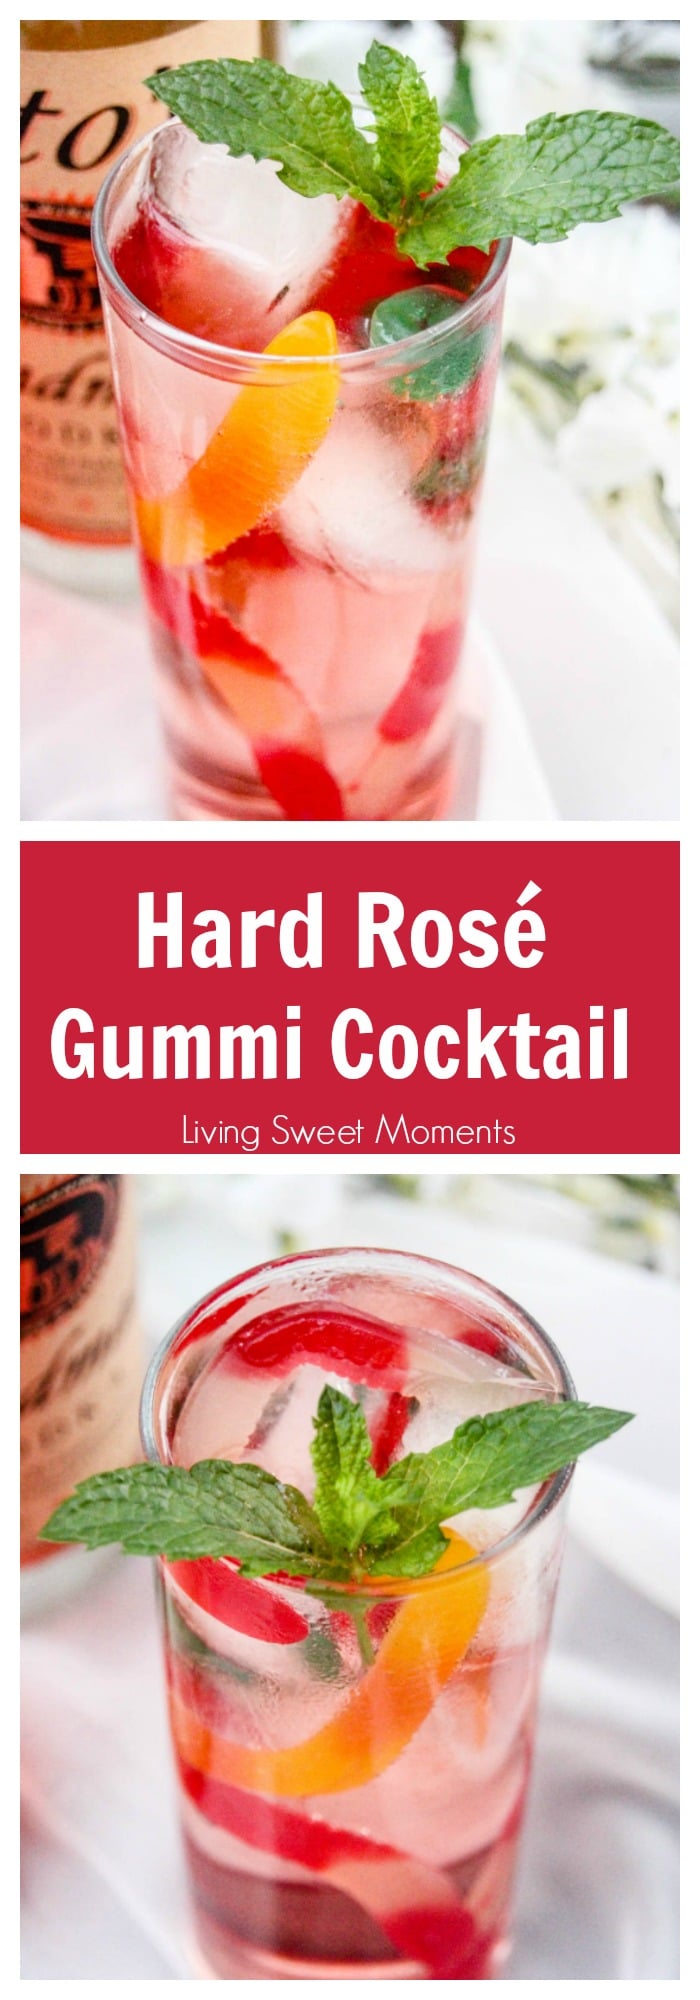 Hard Rosé Gummi Cocktail - this delicious adult drink will make you feel like a kid by using actual gummy worms as an ingredient. Perfect cocktail for all!